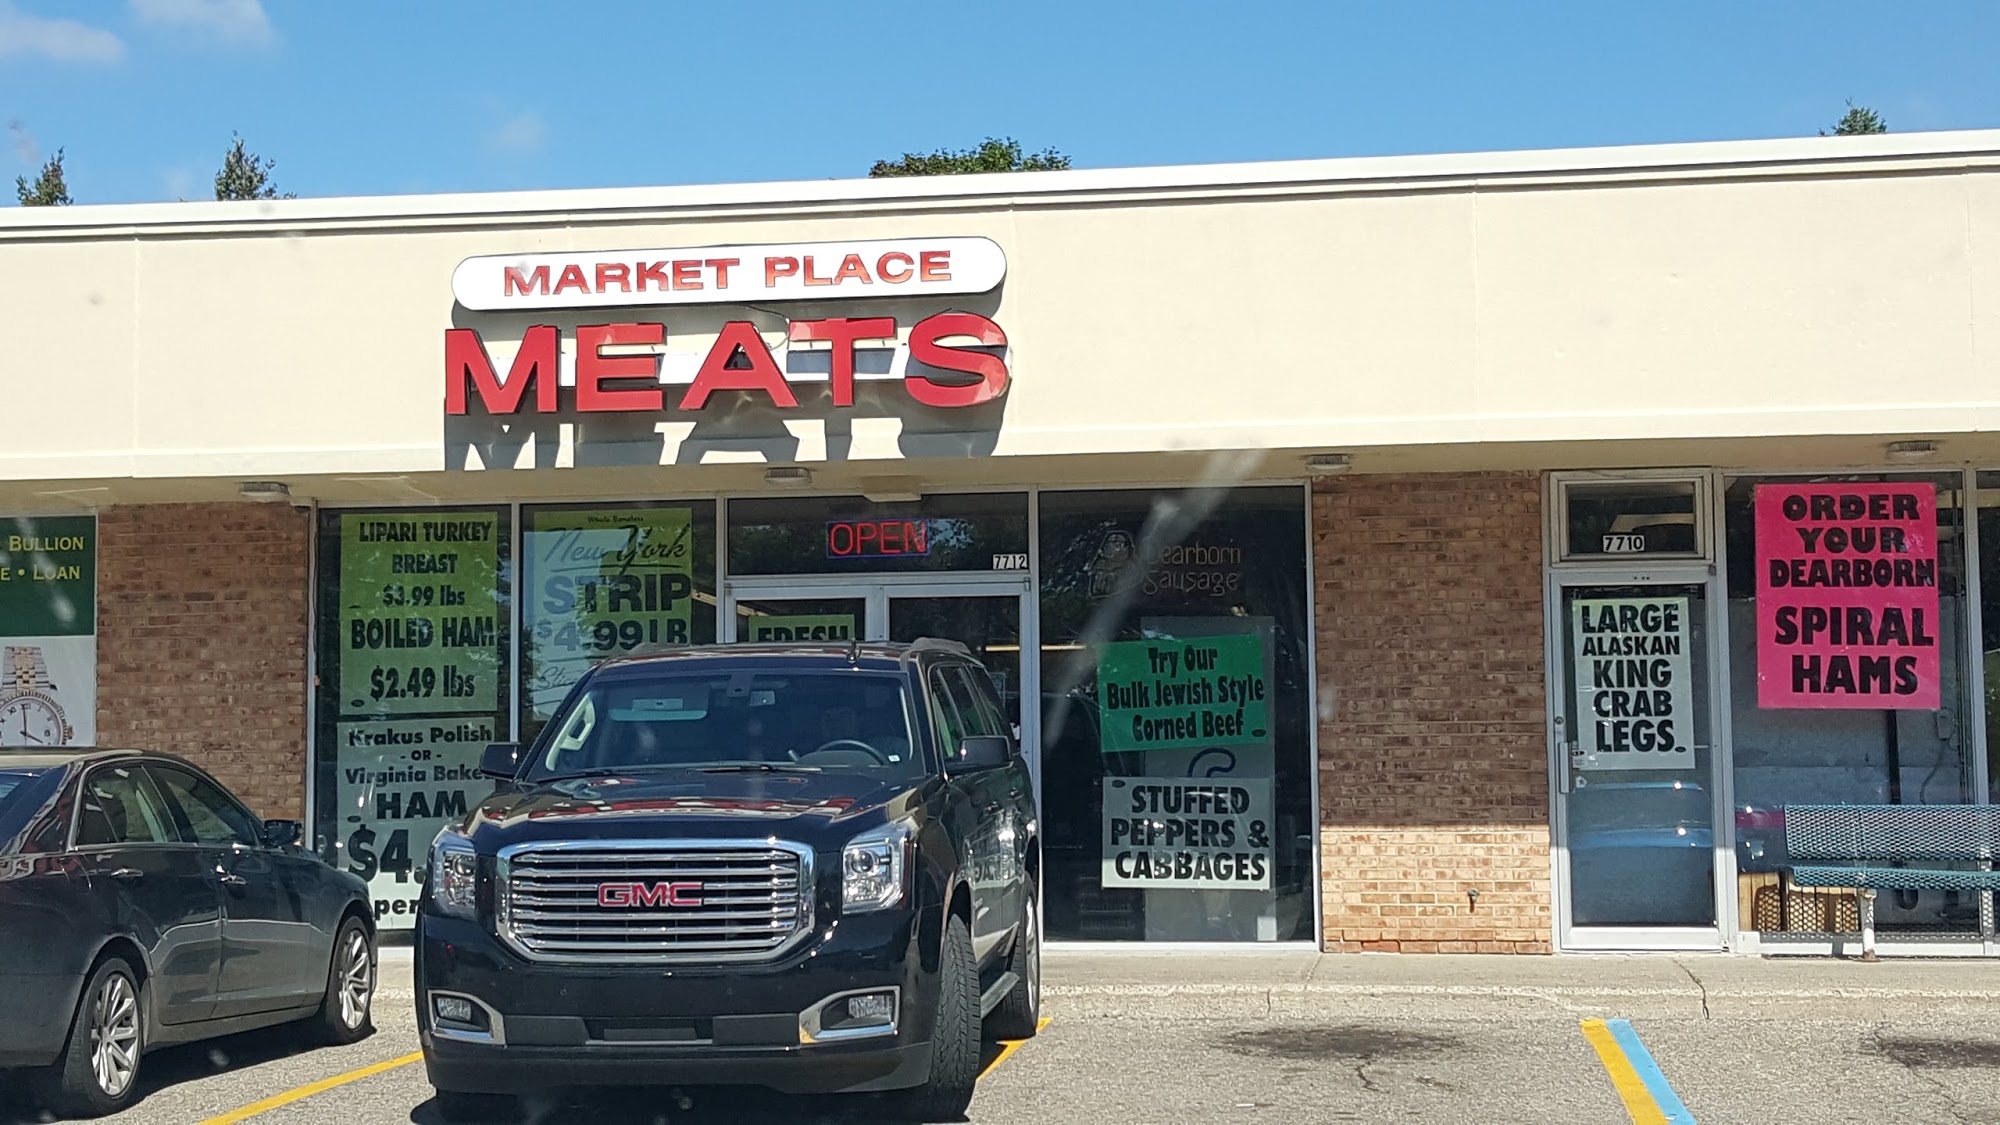 Market Place Meats and Deli